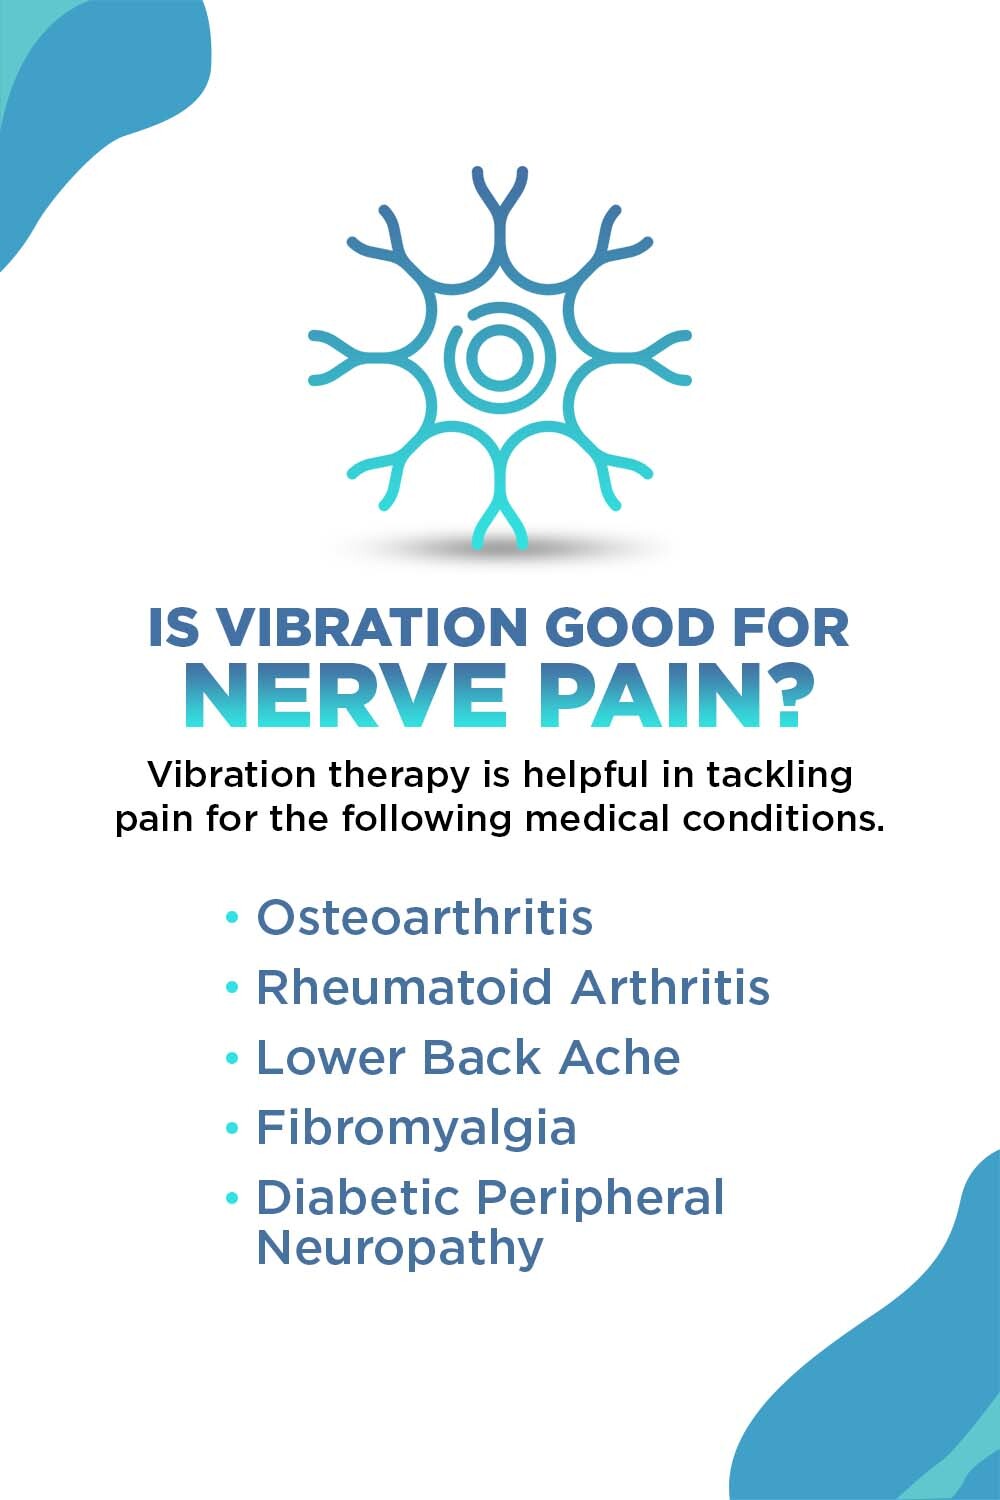 vibration therapy for pain any good